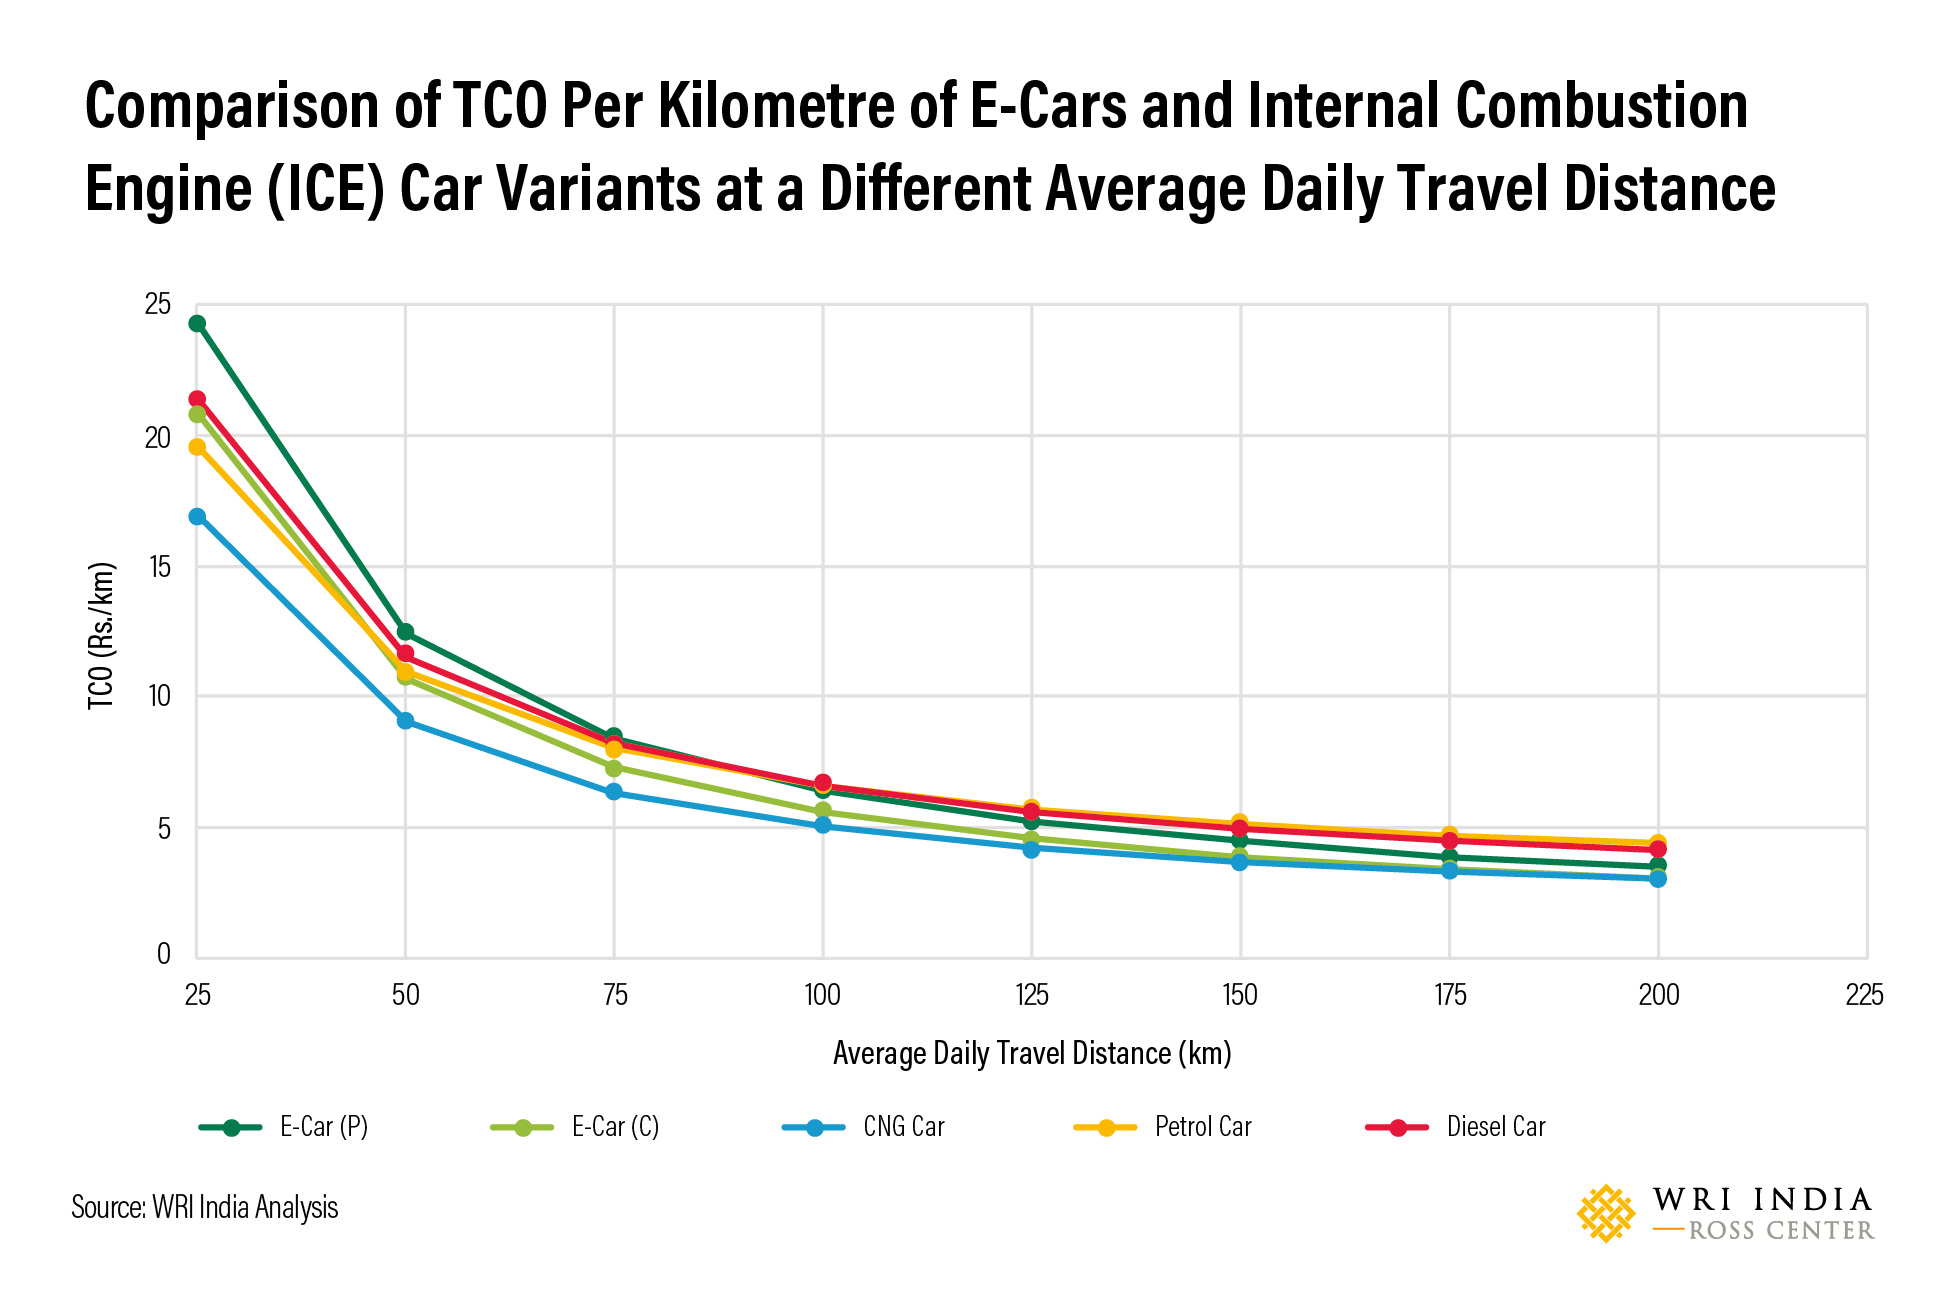 Figure 2 Comparison of TCO per kilometre of e-cars and ICE car variants at a different average daily travel distance.